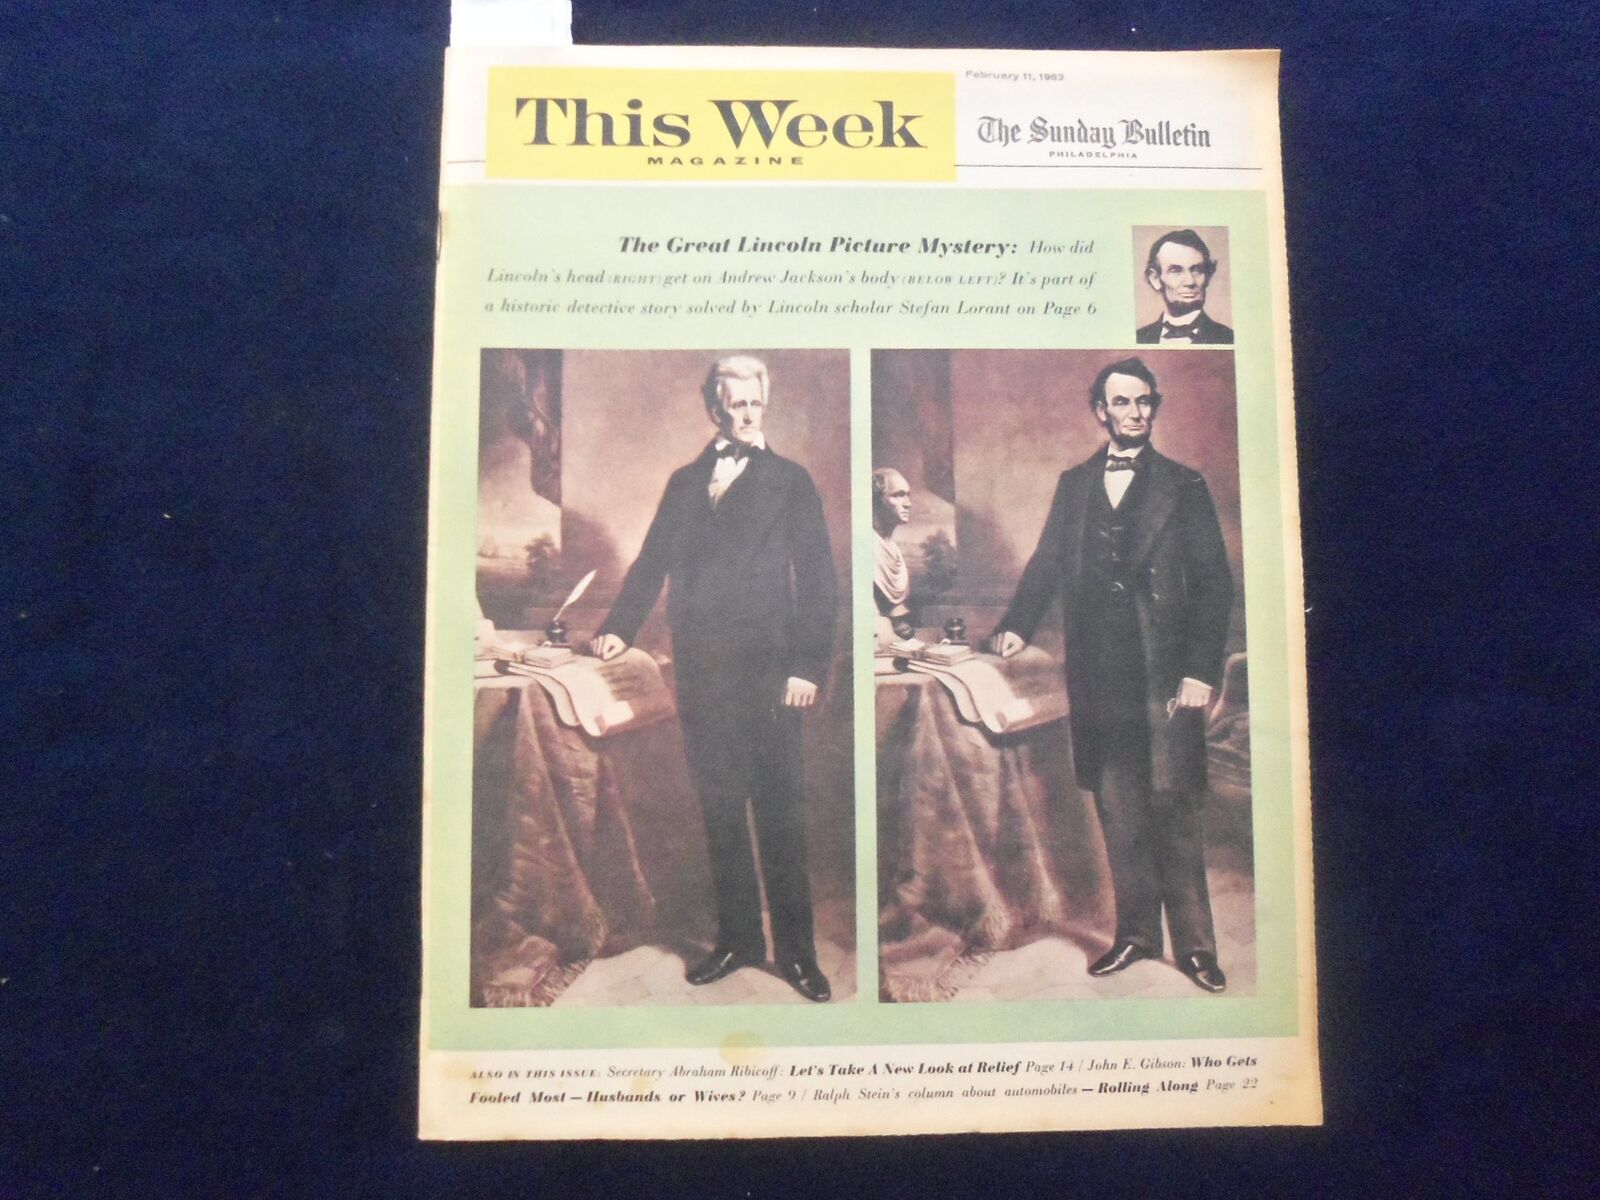 1962 FEBRUARY 11 THIS WEEK MAGAZINE SECTION - ABRAHAM LINCOLN COVER - J 9801